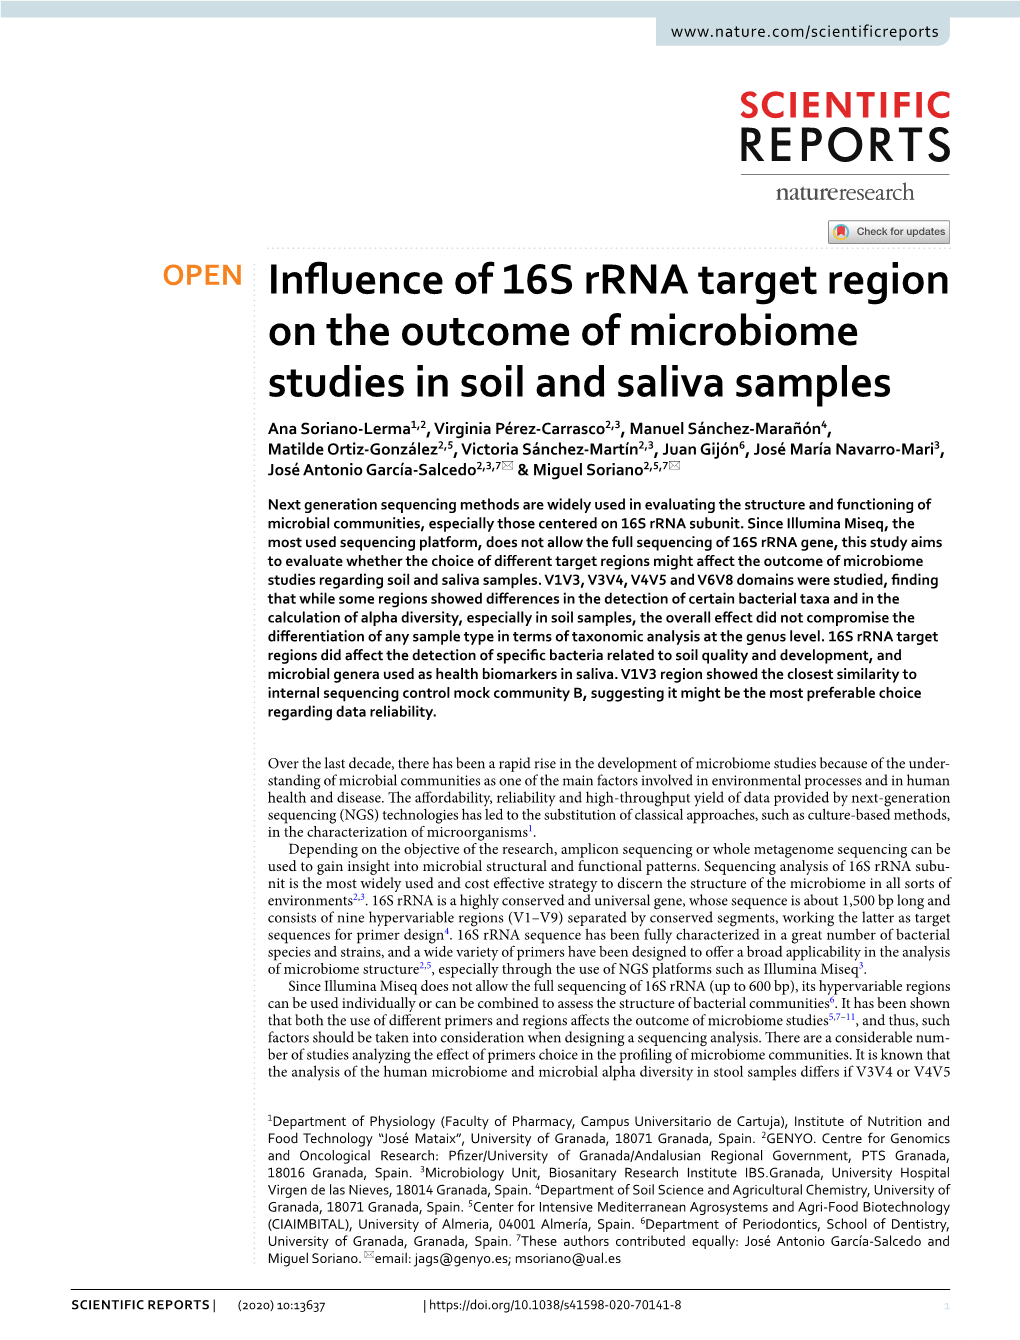 Influence of 16S Rrna Target Region on the Outcome of Microbiome